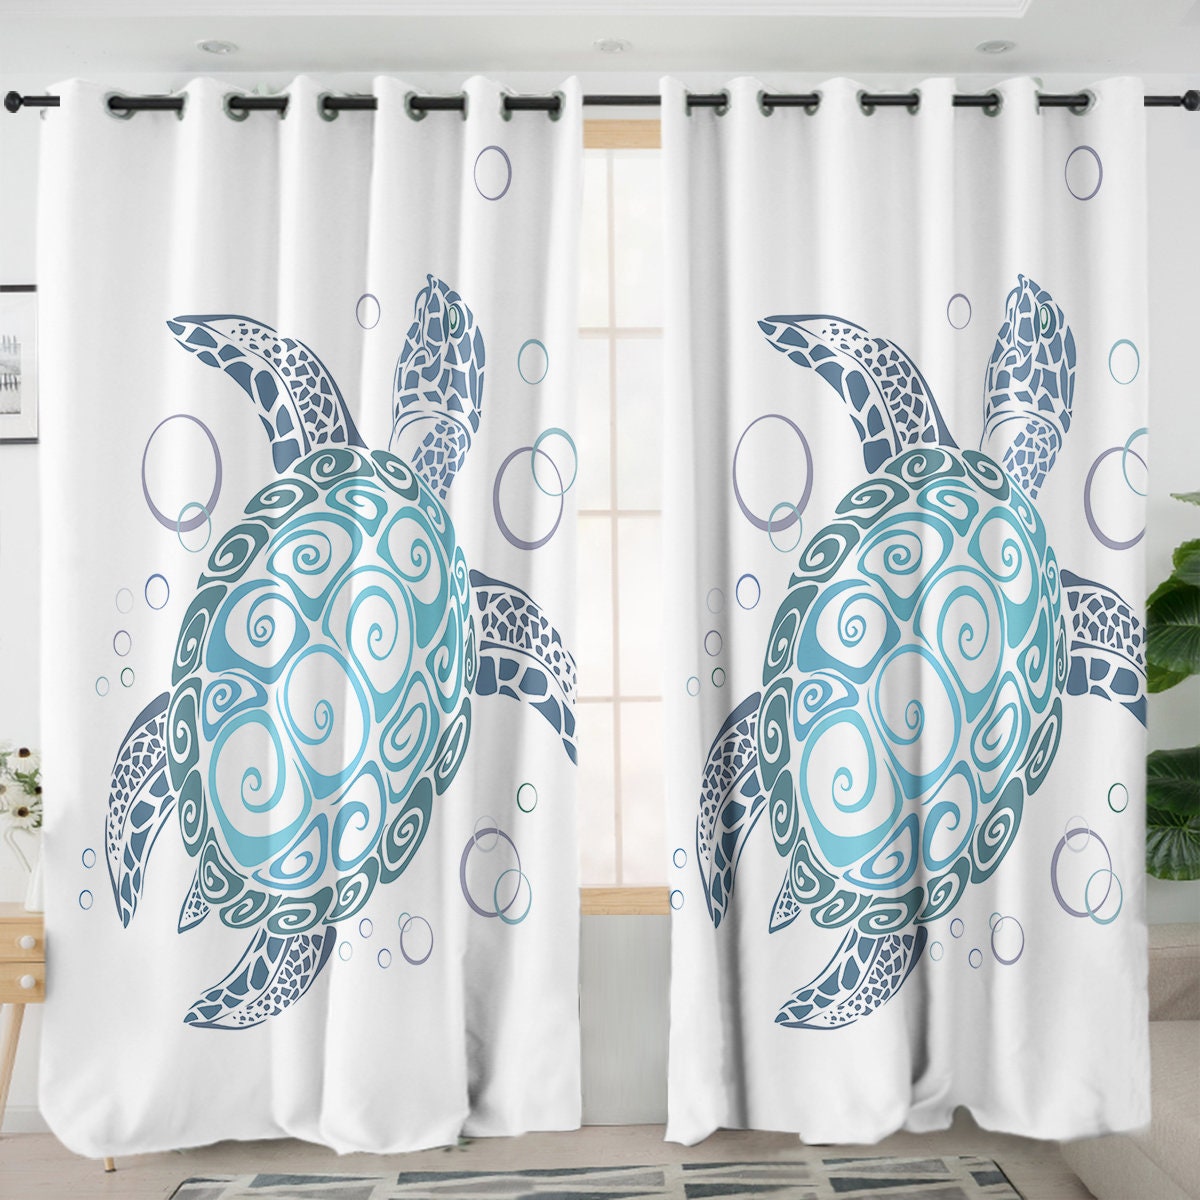 Sea Turtle Shower Curtain - Turtles in Green by Coastal Passion